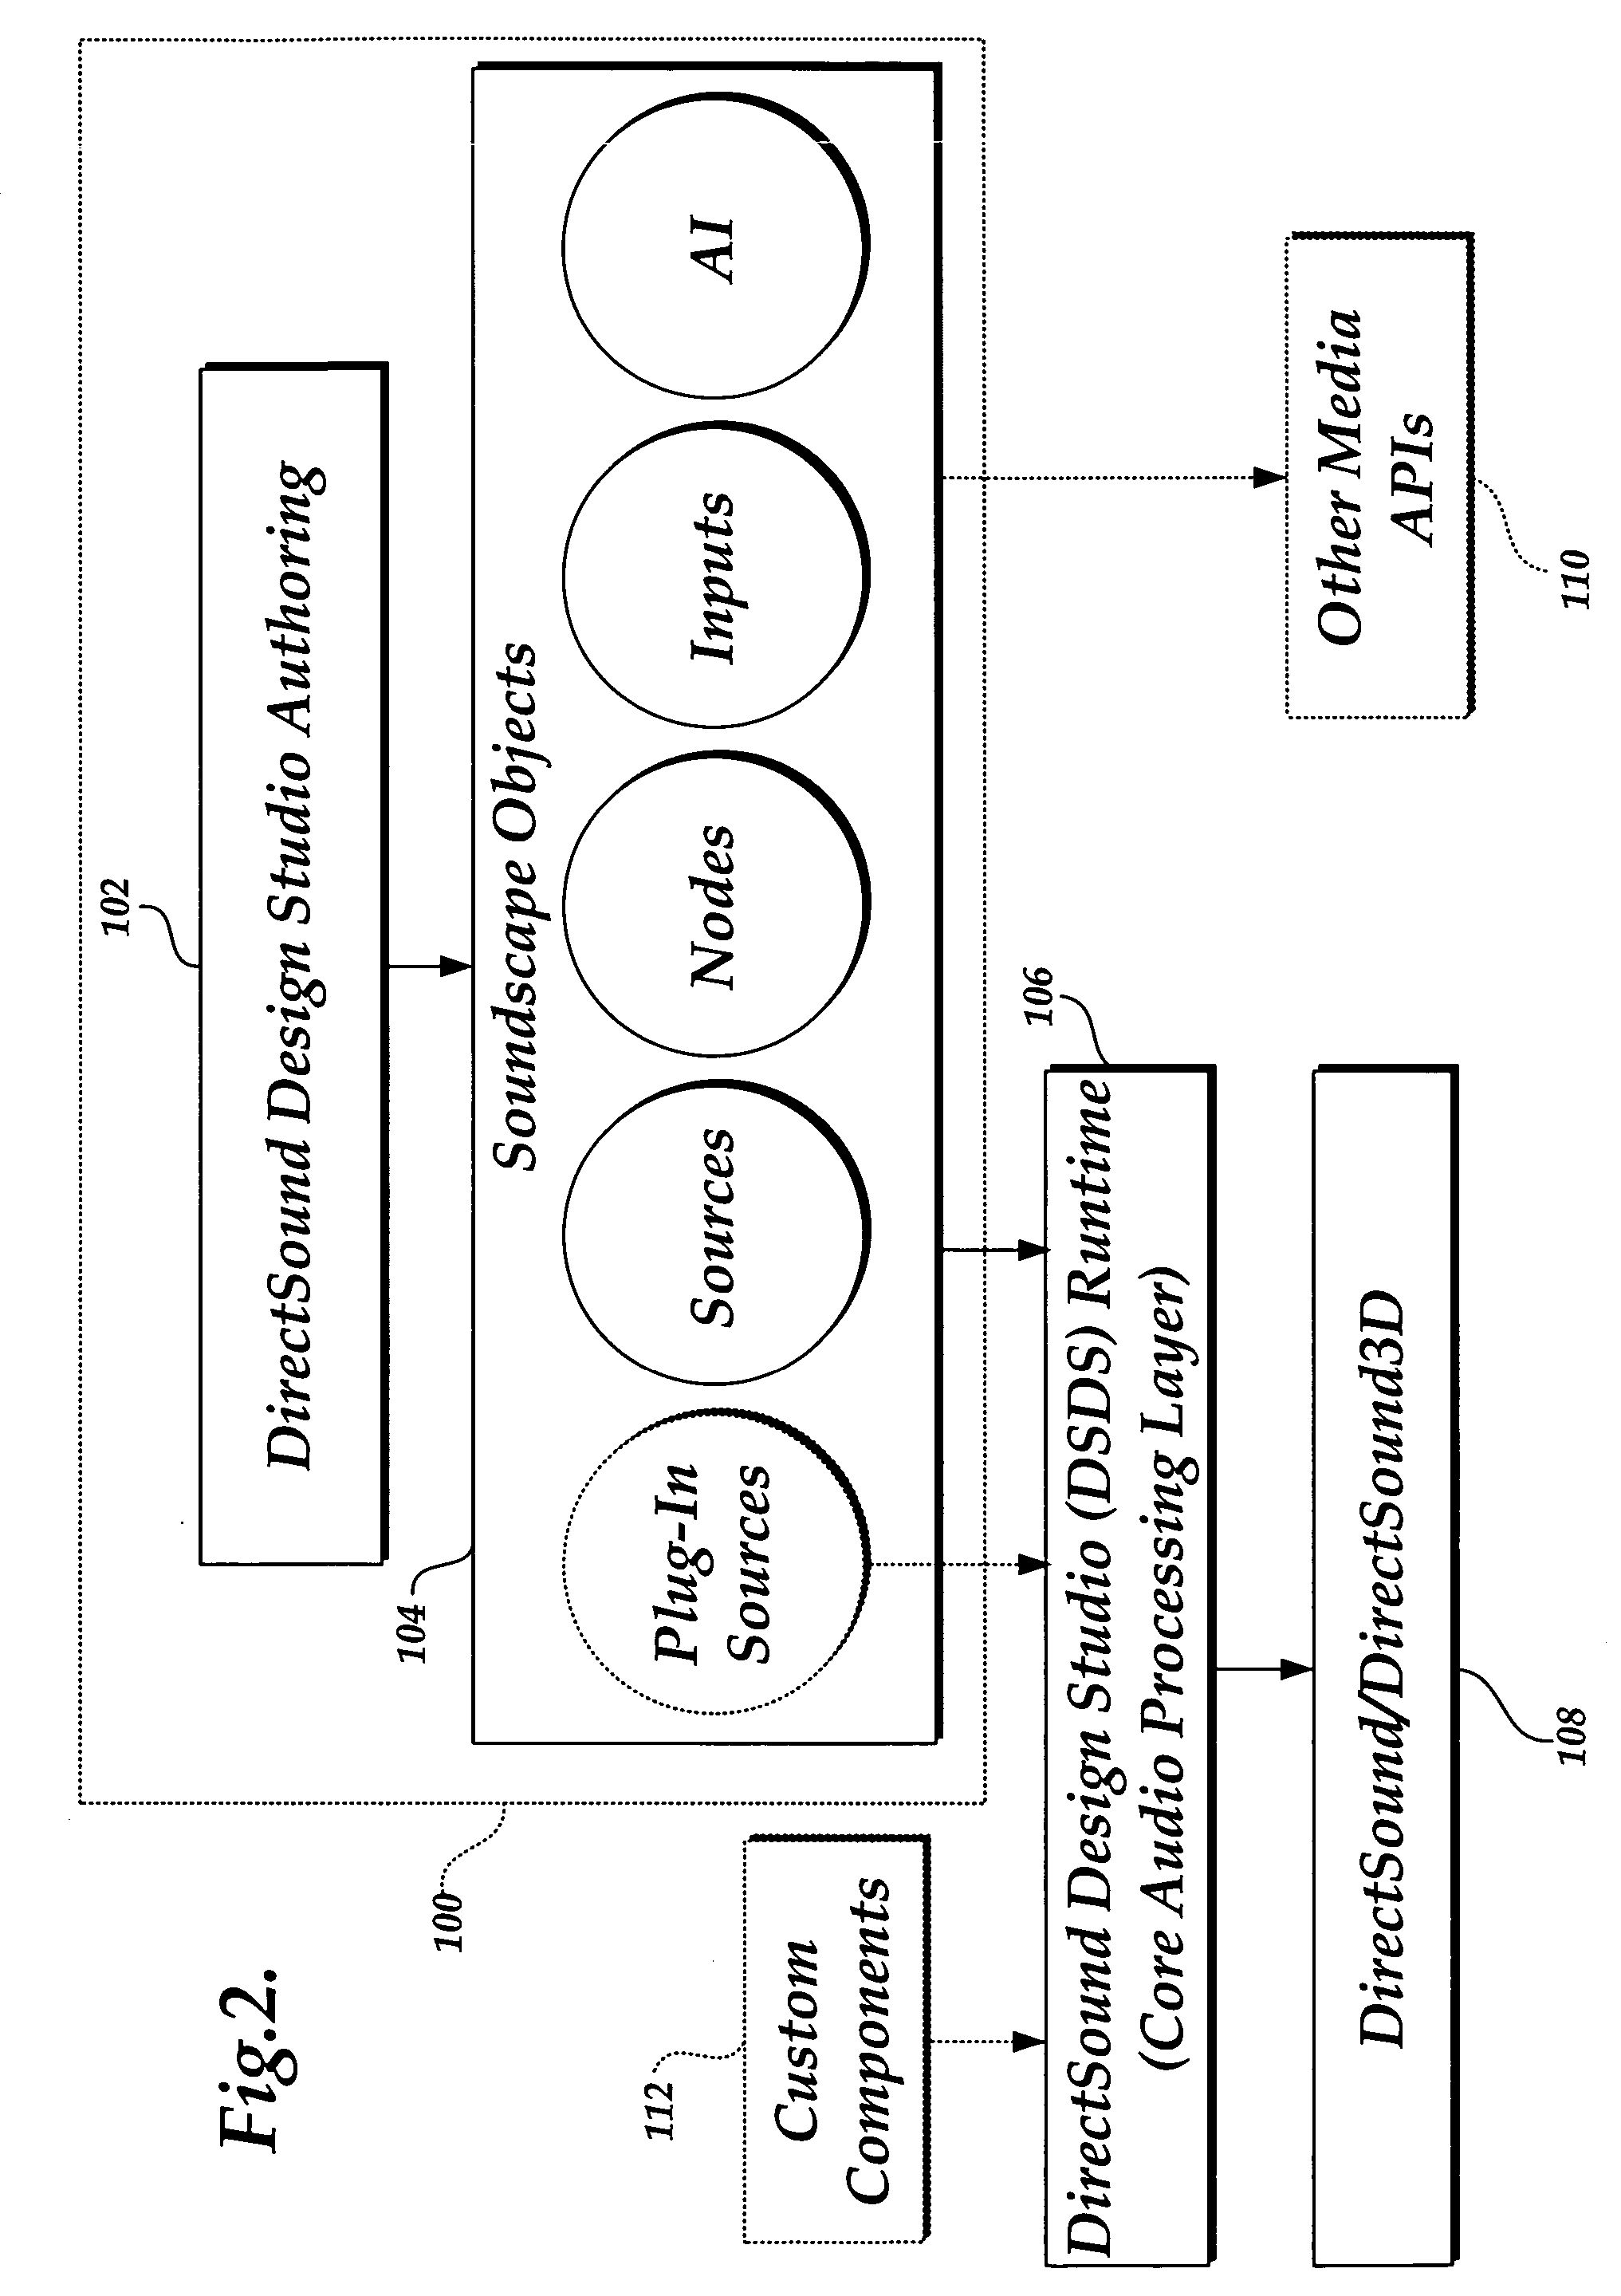 Method and system for authoring a soundscape for a media application